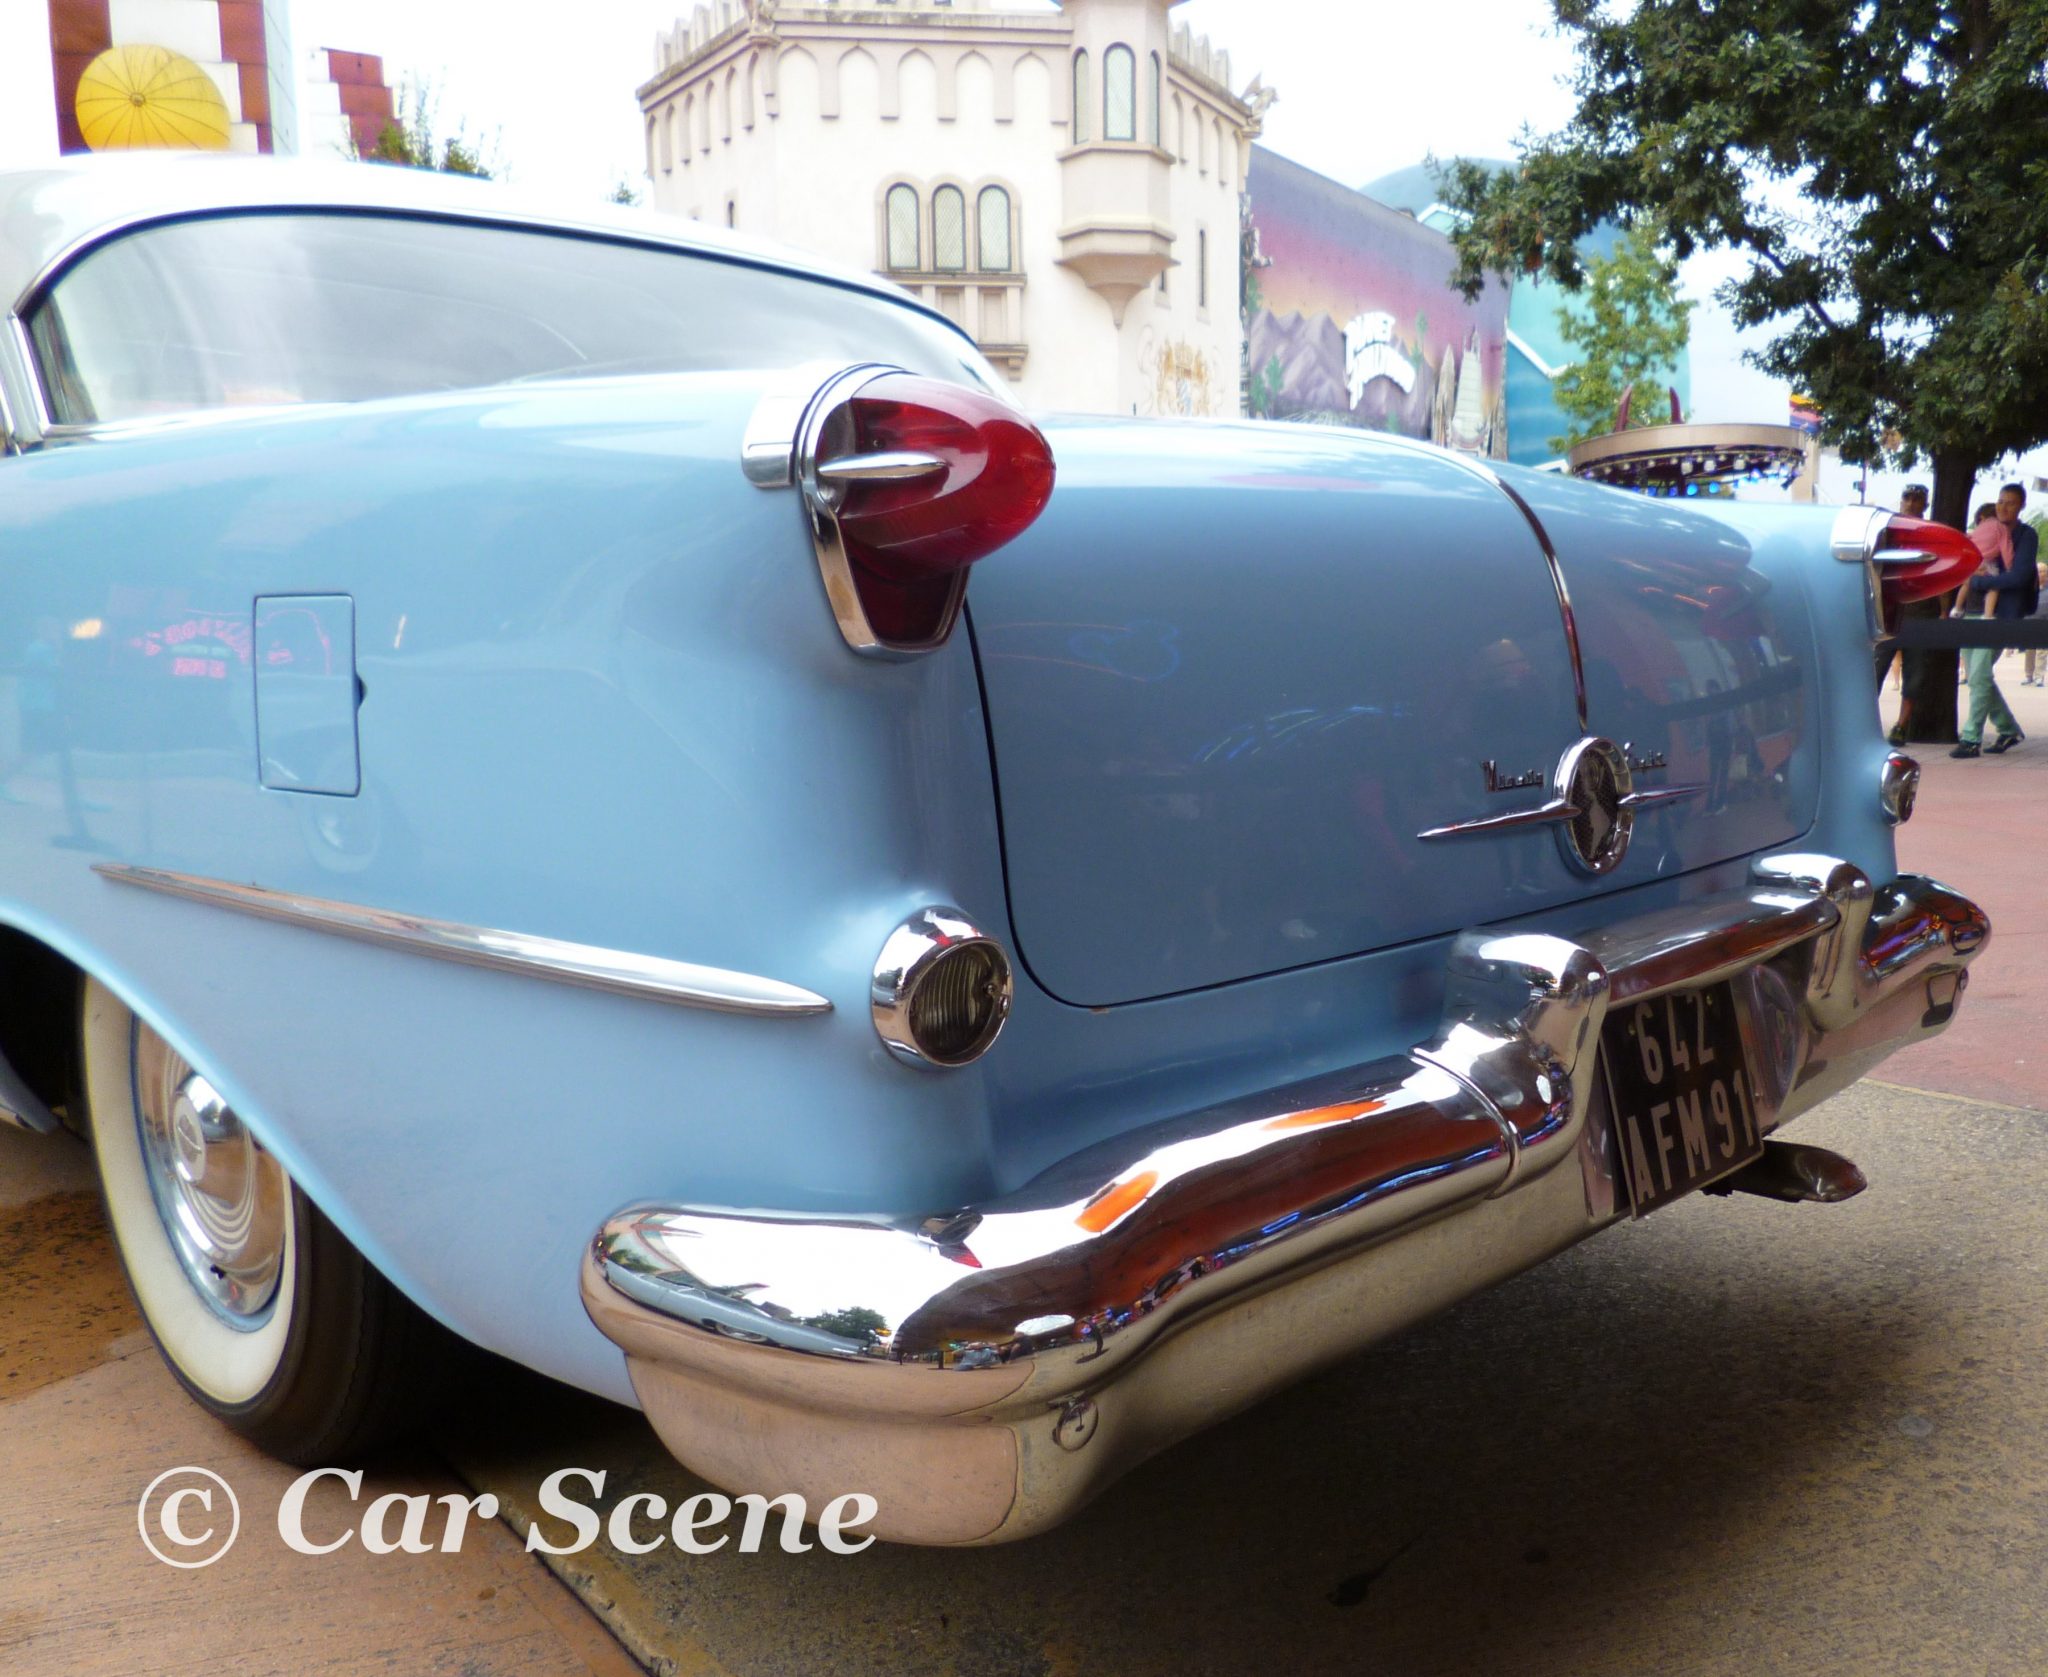 1955 Oldsmobile Rocket 88 Holiday rear view